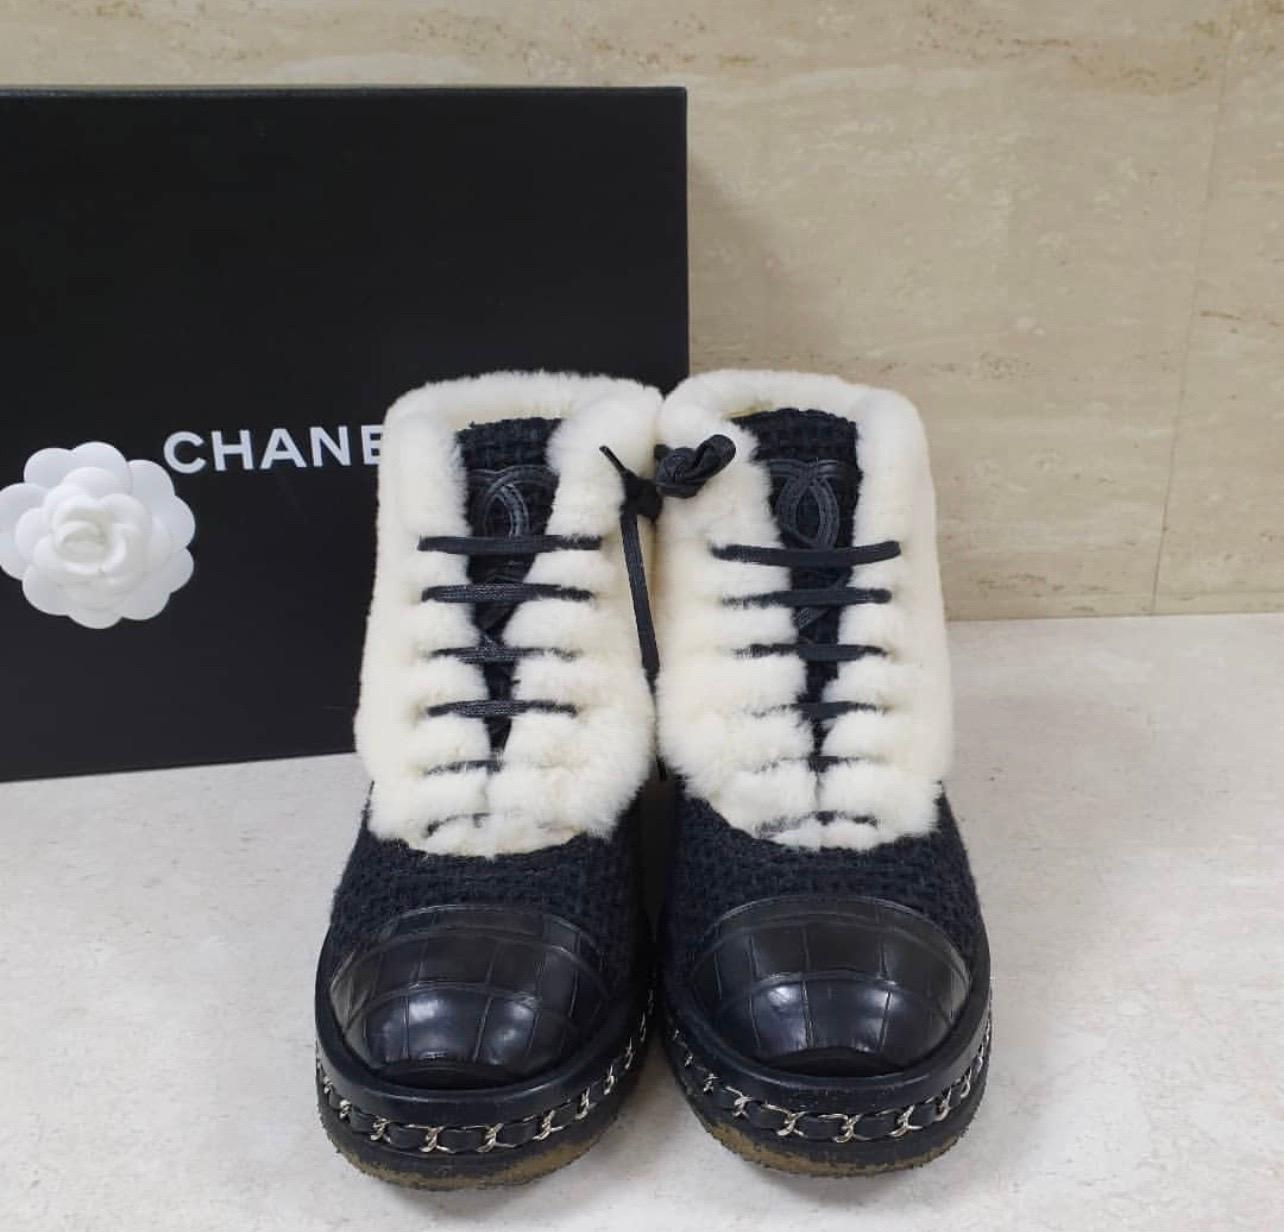 Chanel ankle boots in off-white rubbit fur, black bouclé and quilted leather heel featuring a black croco embossed leather tip. 
Rubber sole with silver-tone signature chain detail around. 
Lined in off-white leather. 
Sz.39
Very good condition.
No